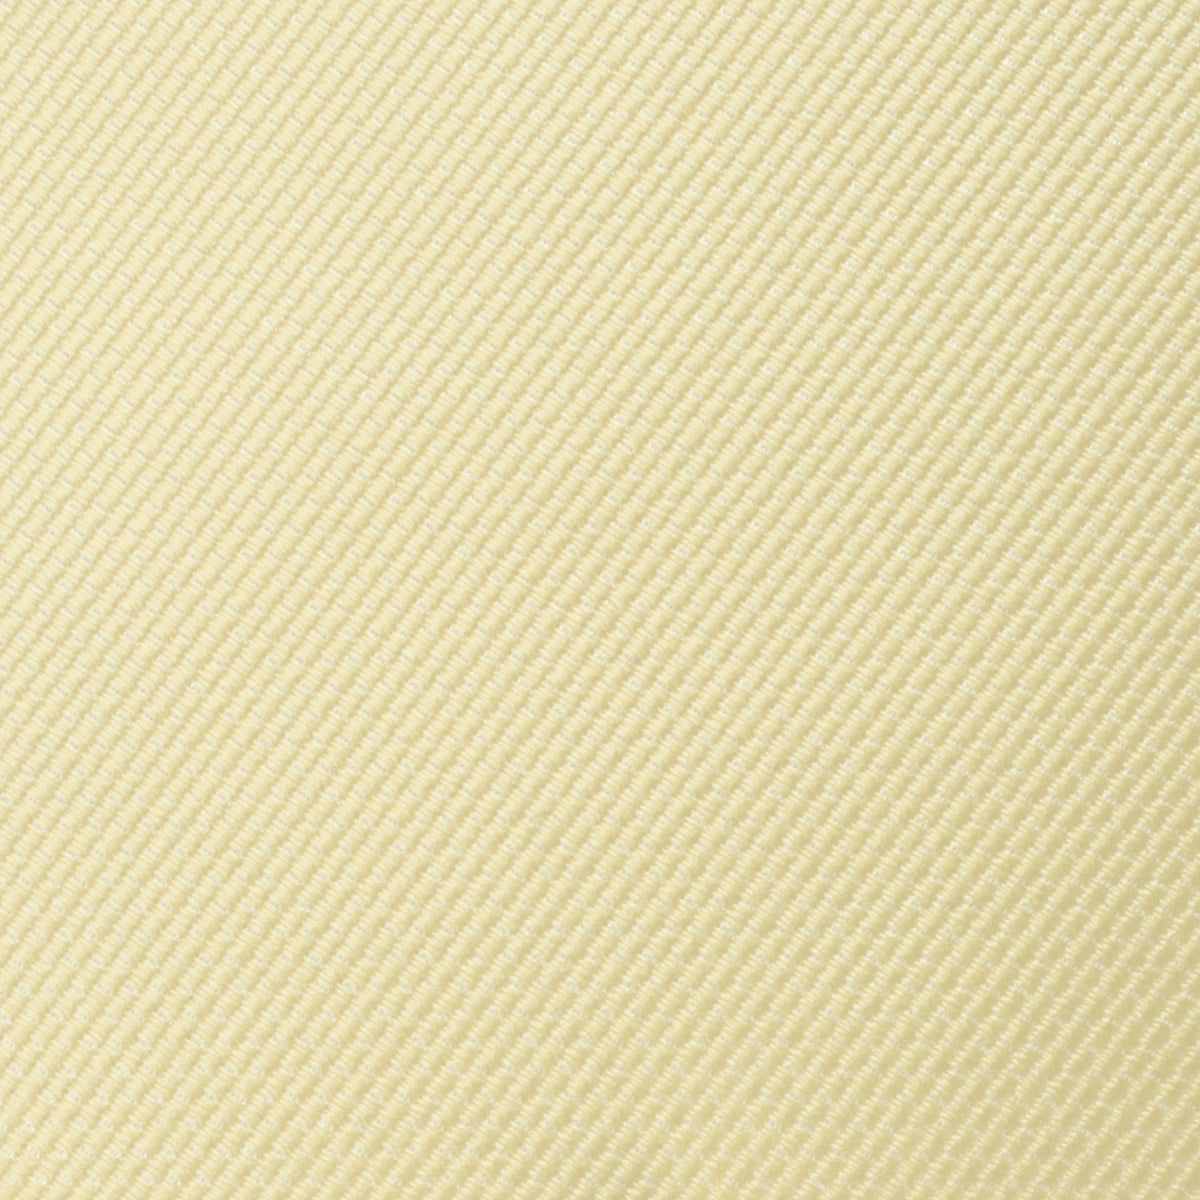 Canary Blush Yellow Weave Pocket Square Fabric